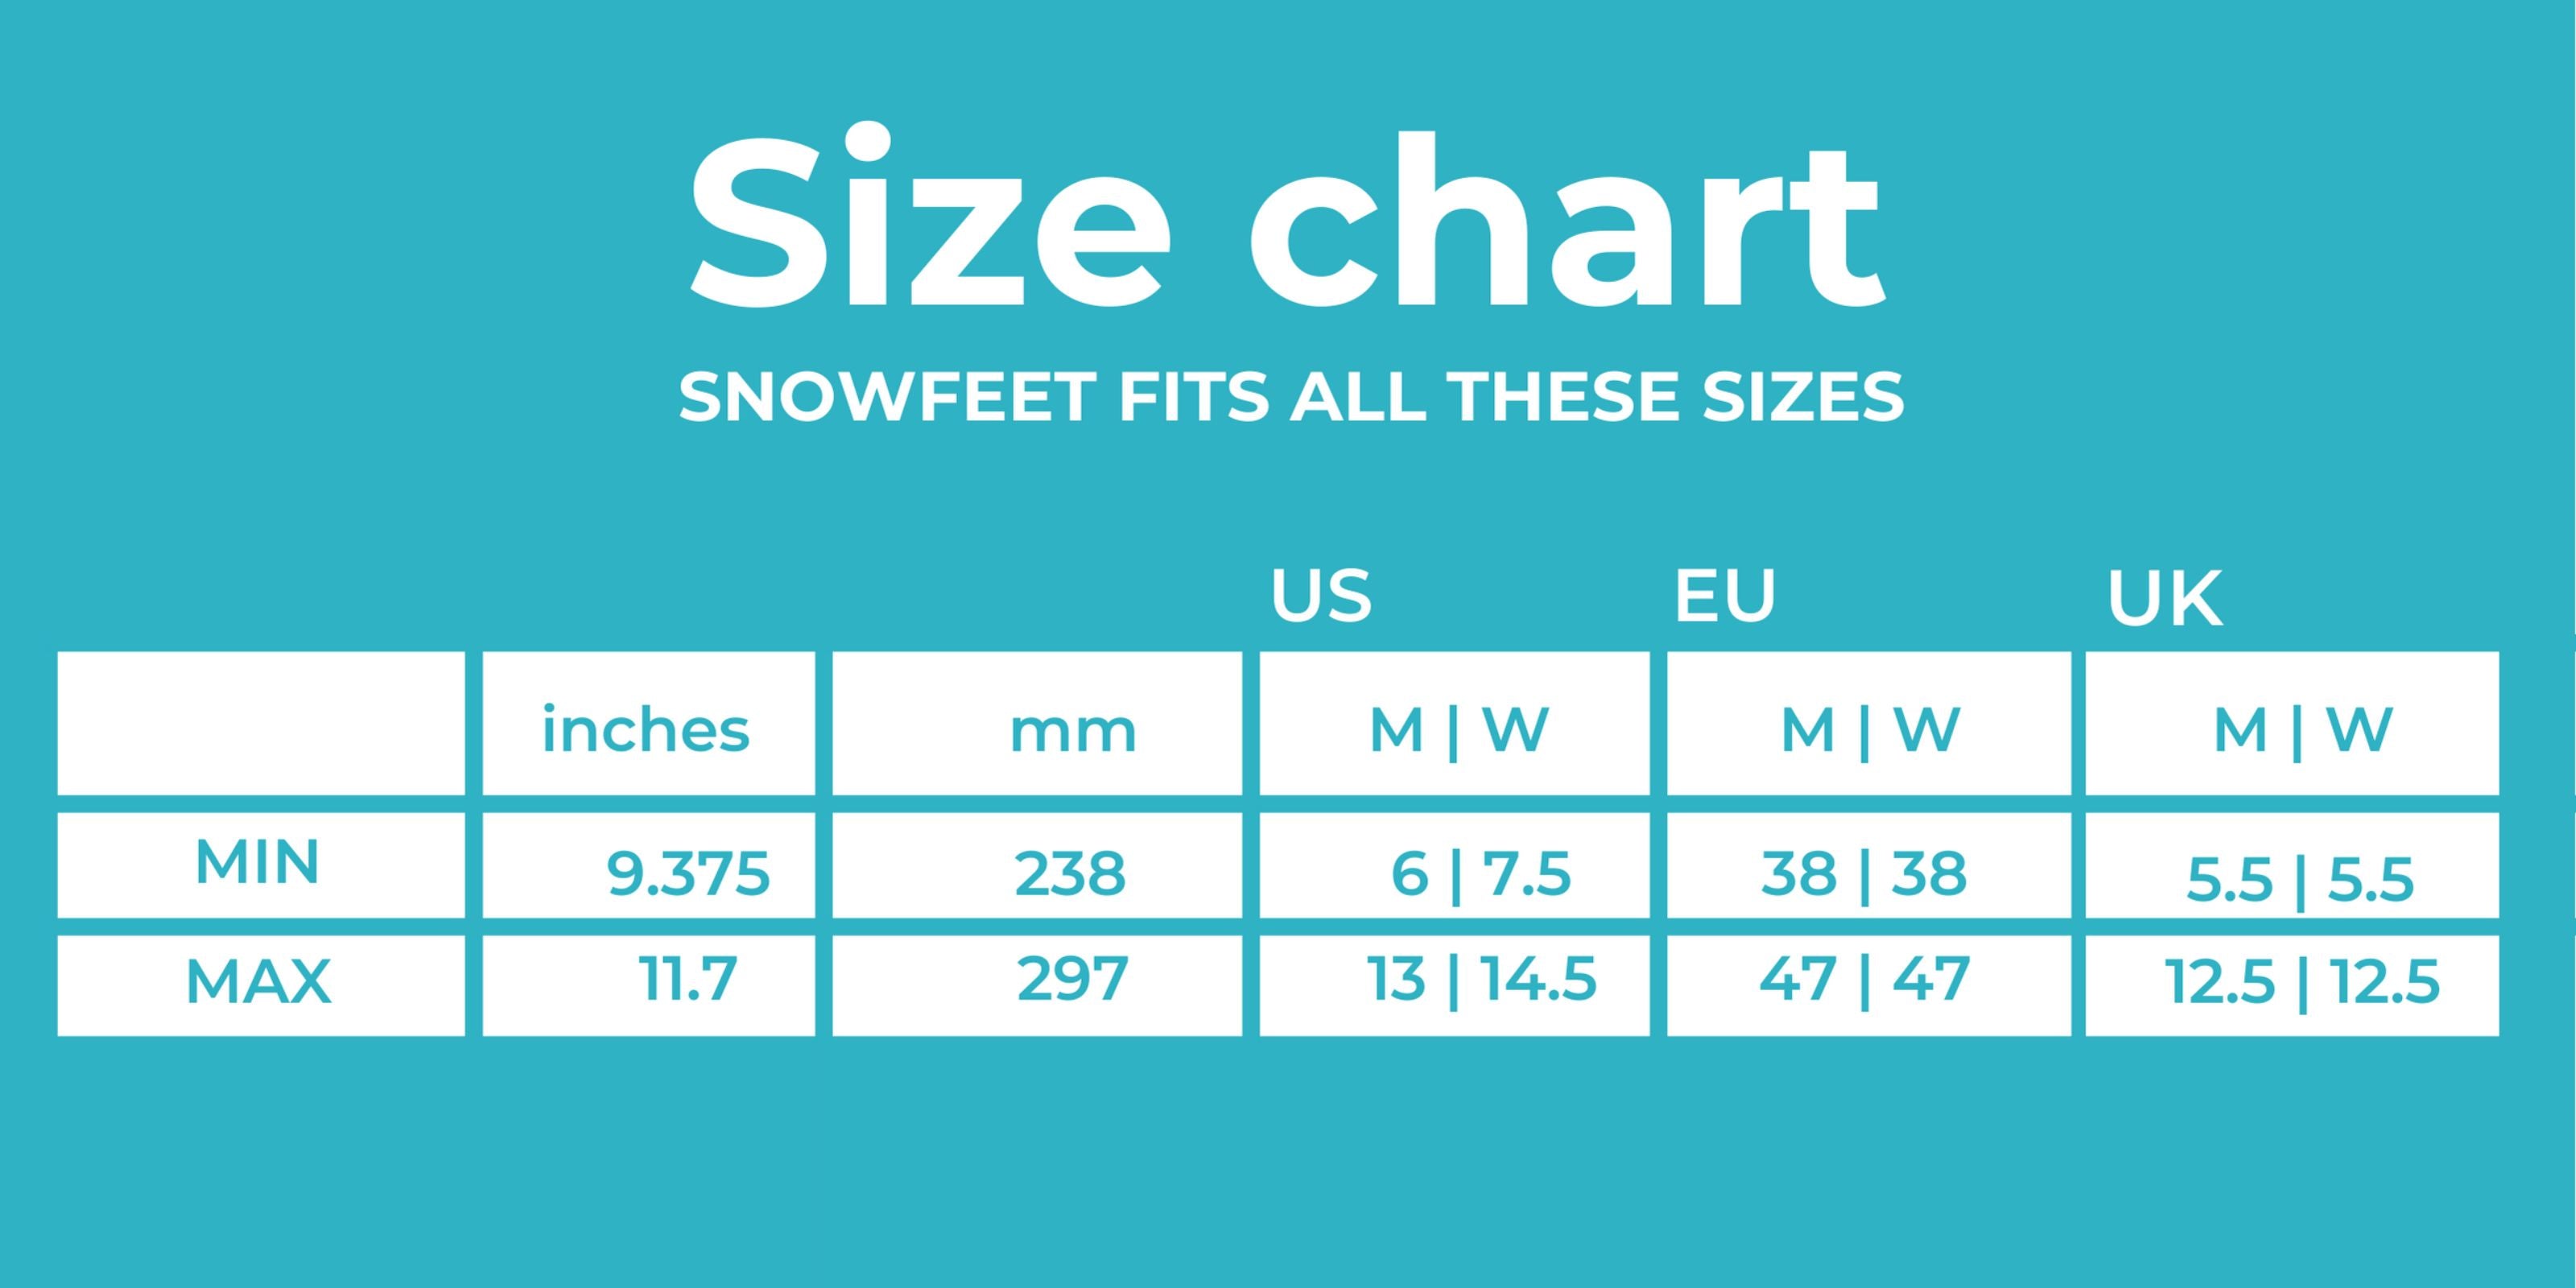 Snowfeet mini skis, downhill skiing, combination of skiing and skating. Skiskating, new winter sport, ski-shoe attachments. Use Snowfeet with winter boots or snowboard shoes.